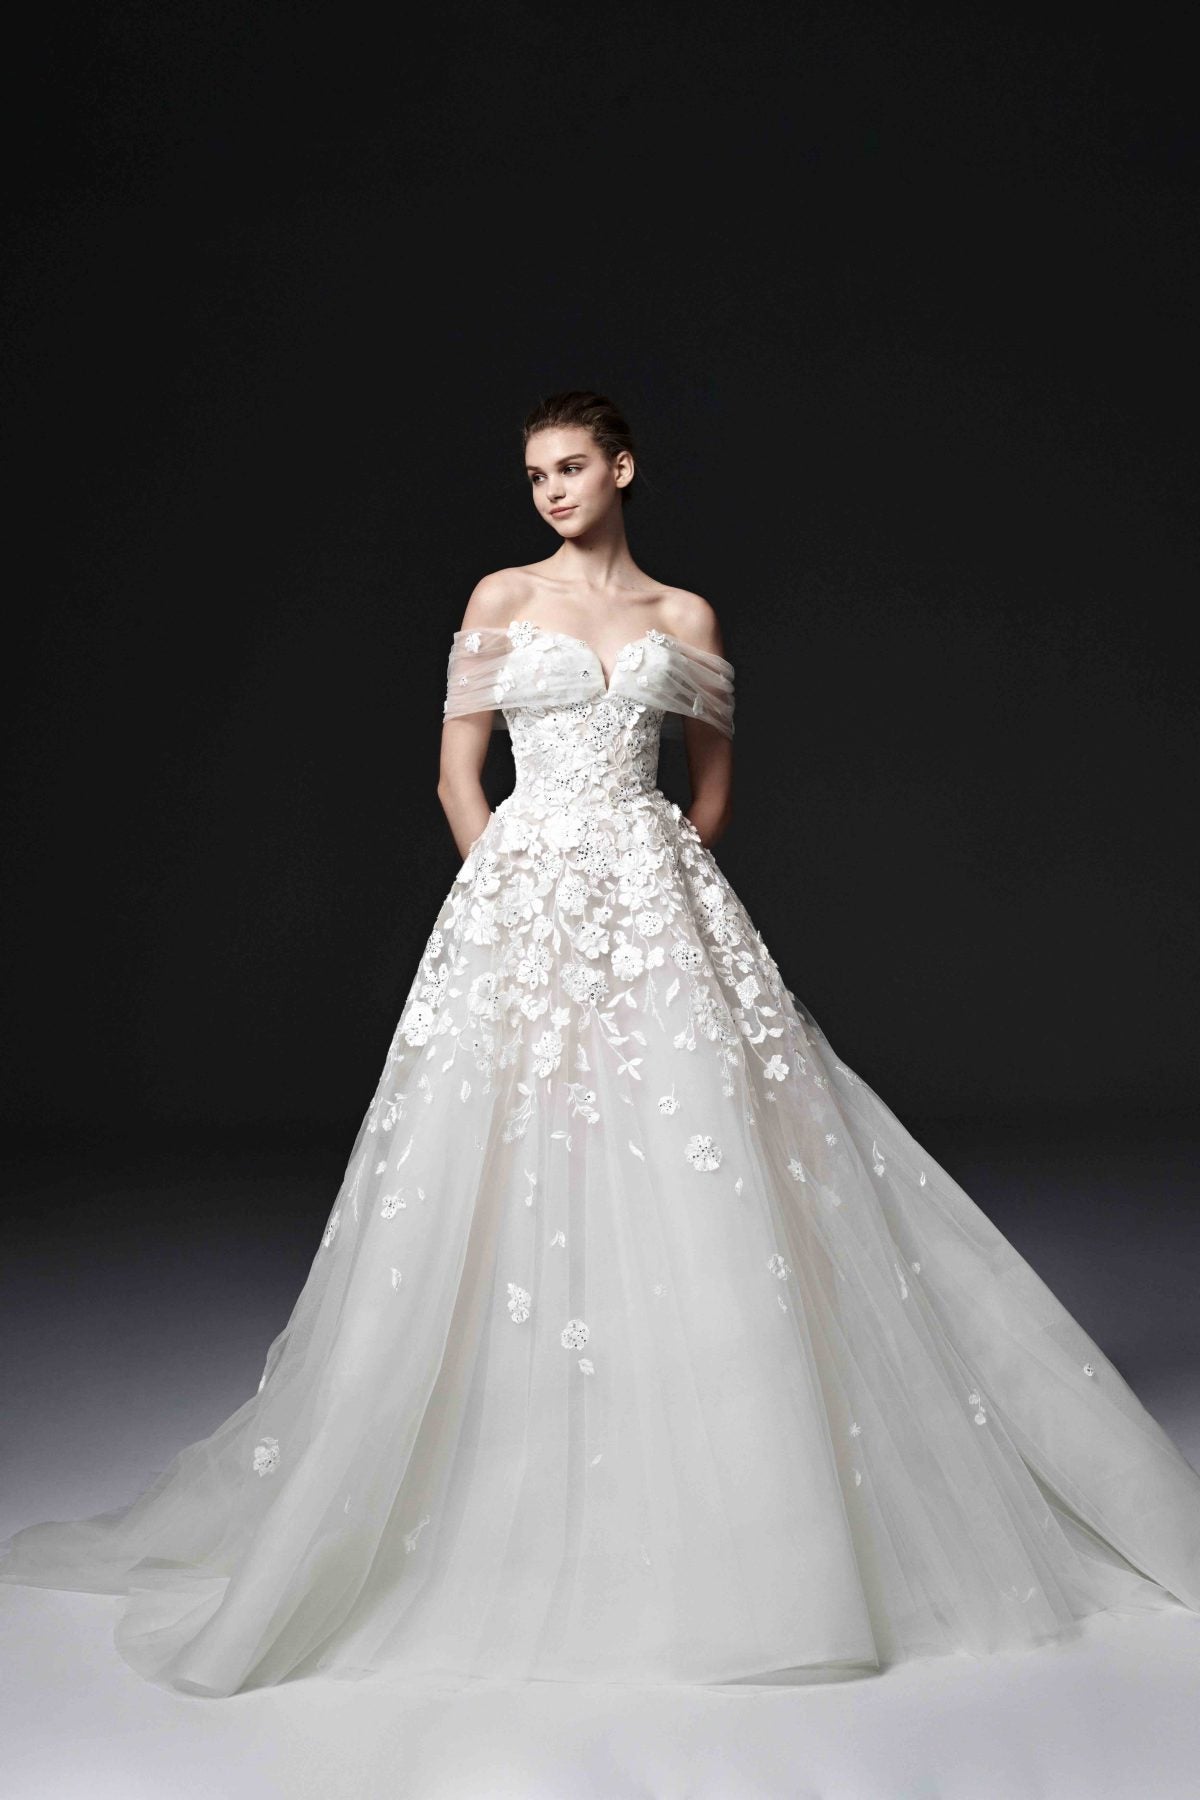 Strapless Ball Gown Wedding Dress With Floral Lace | Kleinfeld Bridal